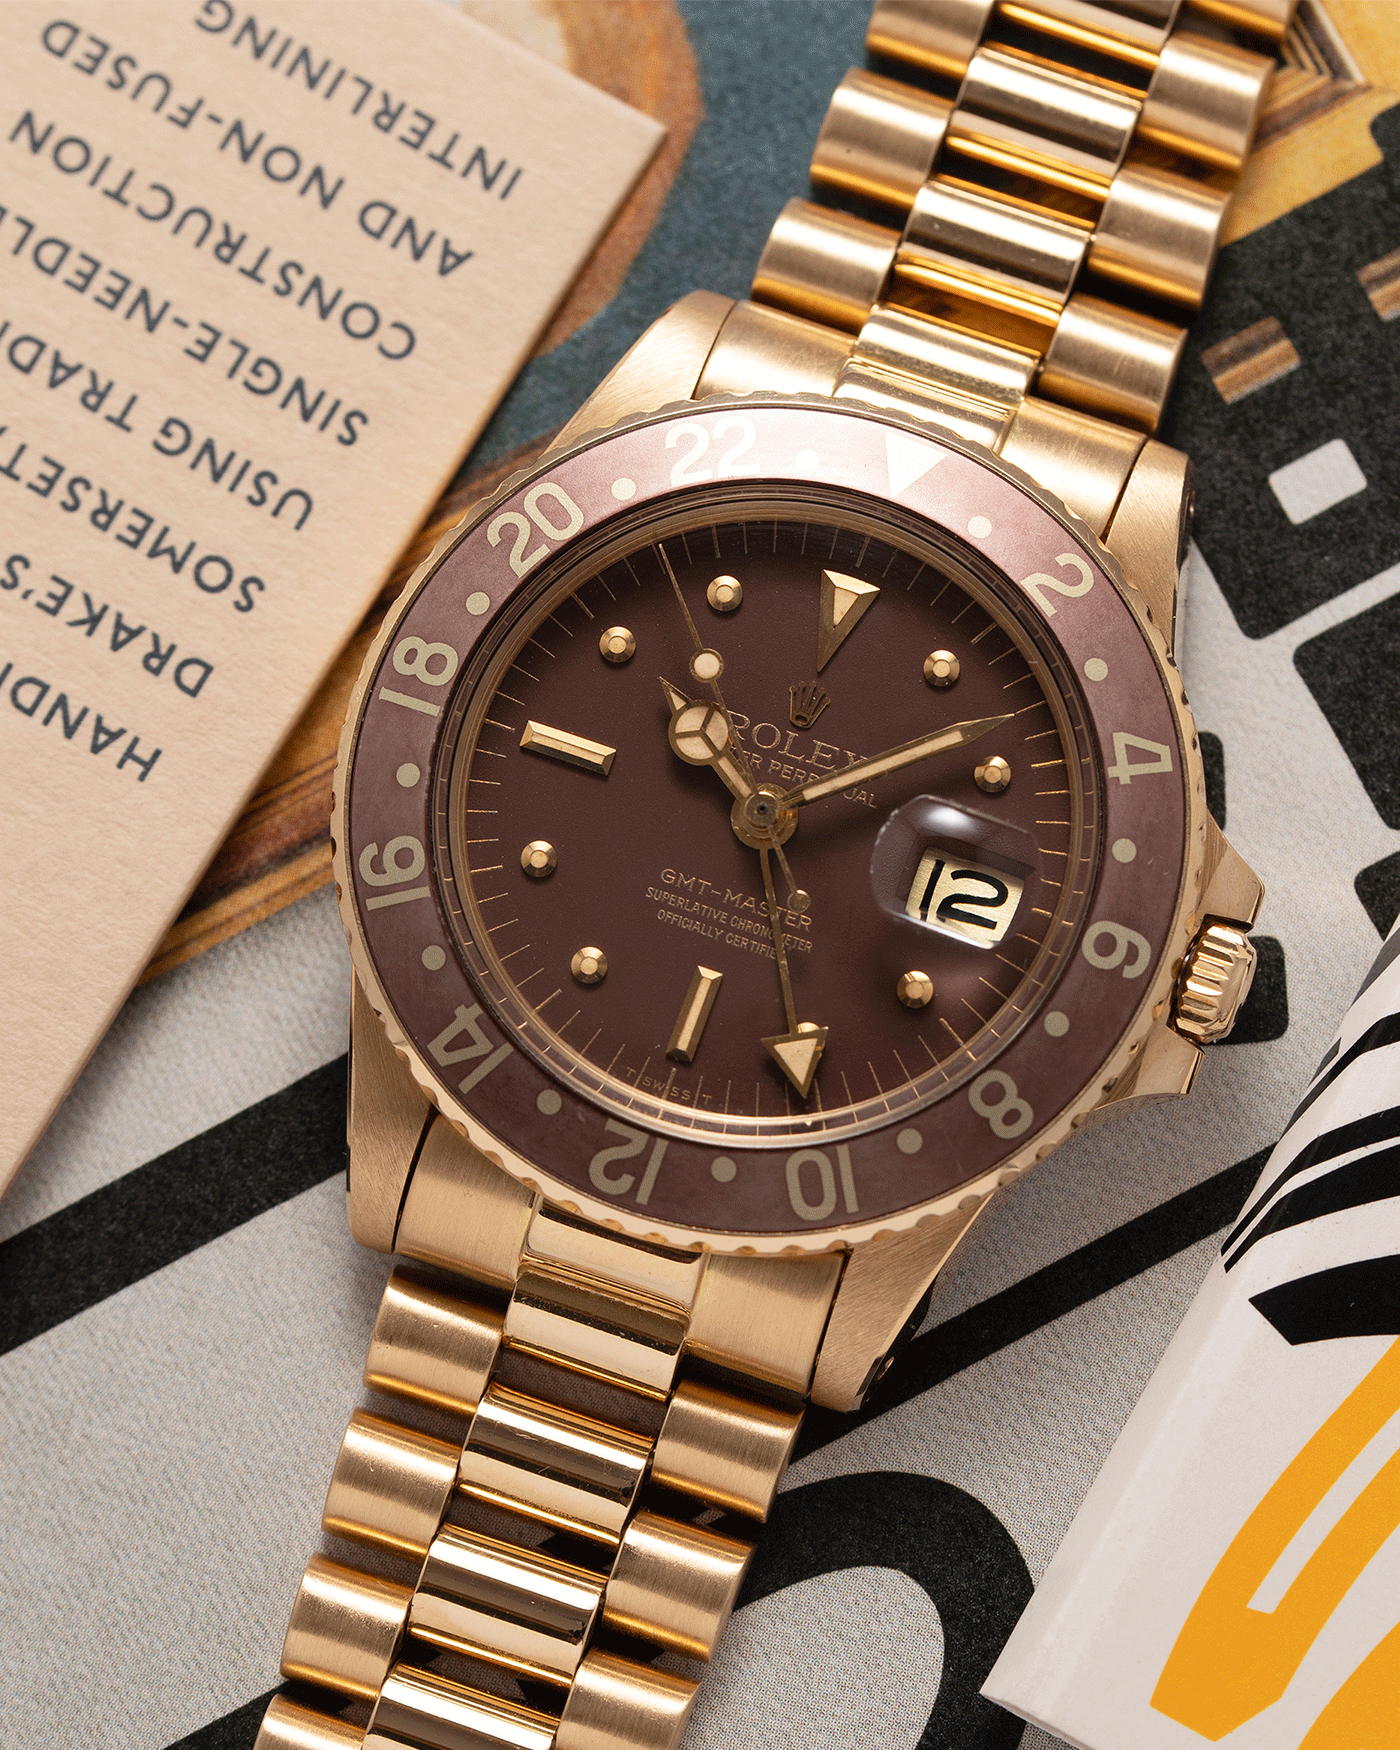 Brand: Rolex Year: 1978 Model: GMT-Master Reference Number: 1675 Serial Number: 5.3 mil Material: 18k Yellow Gold Movement: Cal. 1570 Case Diameter: 40mm Lug Width: 20mm Strap: 18k Yellow Gold Rolex President Bracelet